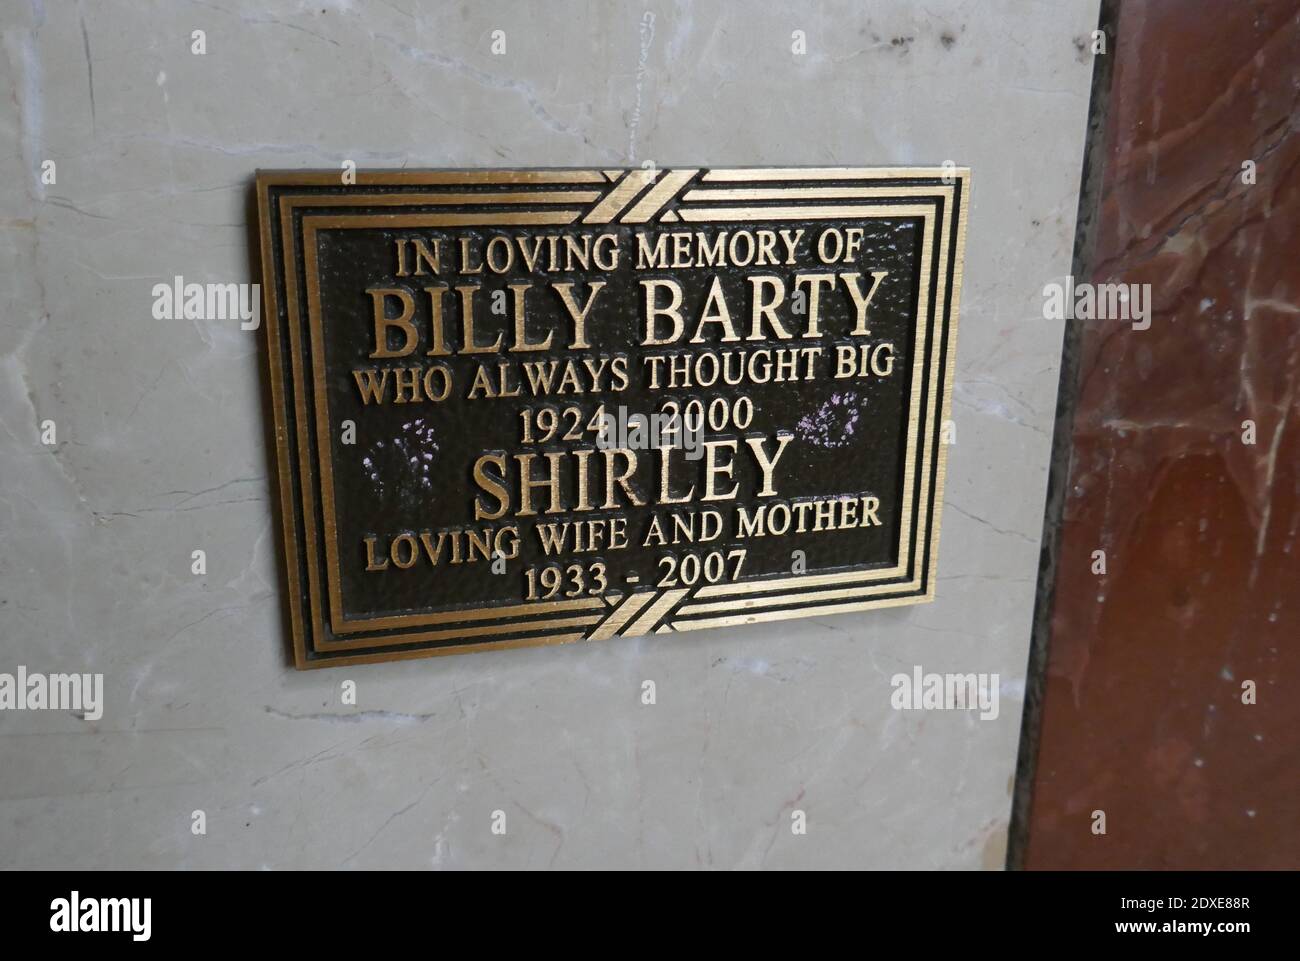 Glendale, California, USA 23rd December 2020 A general view of atmosphere of Actor Billy Barty's Grave in Patriots Terrace in Columbarium of Blessedness in Freedom Mausoleum at Forest Lawn Memorial Park on December 23, 2020 in Glendale, California, USA. Photo by Barry King/Alamy Stock Photo Stock Photo